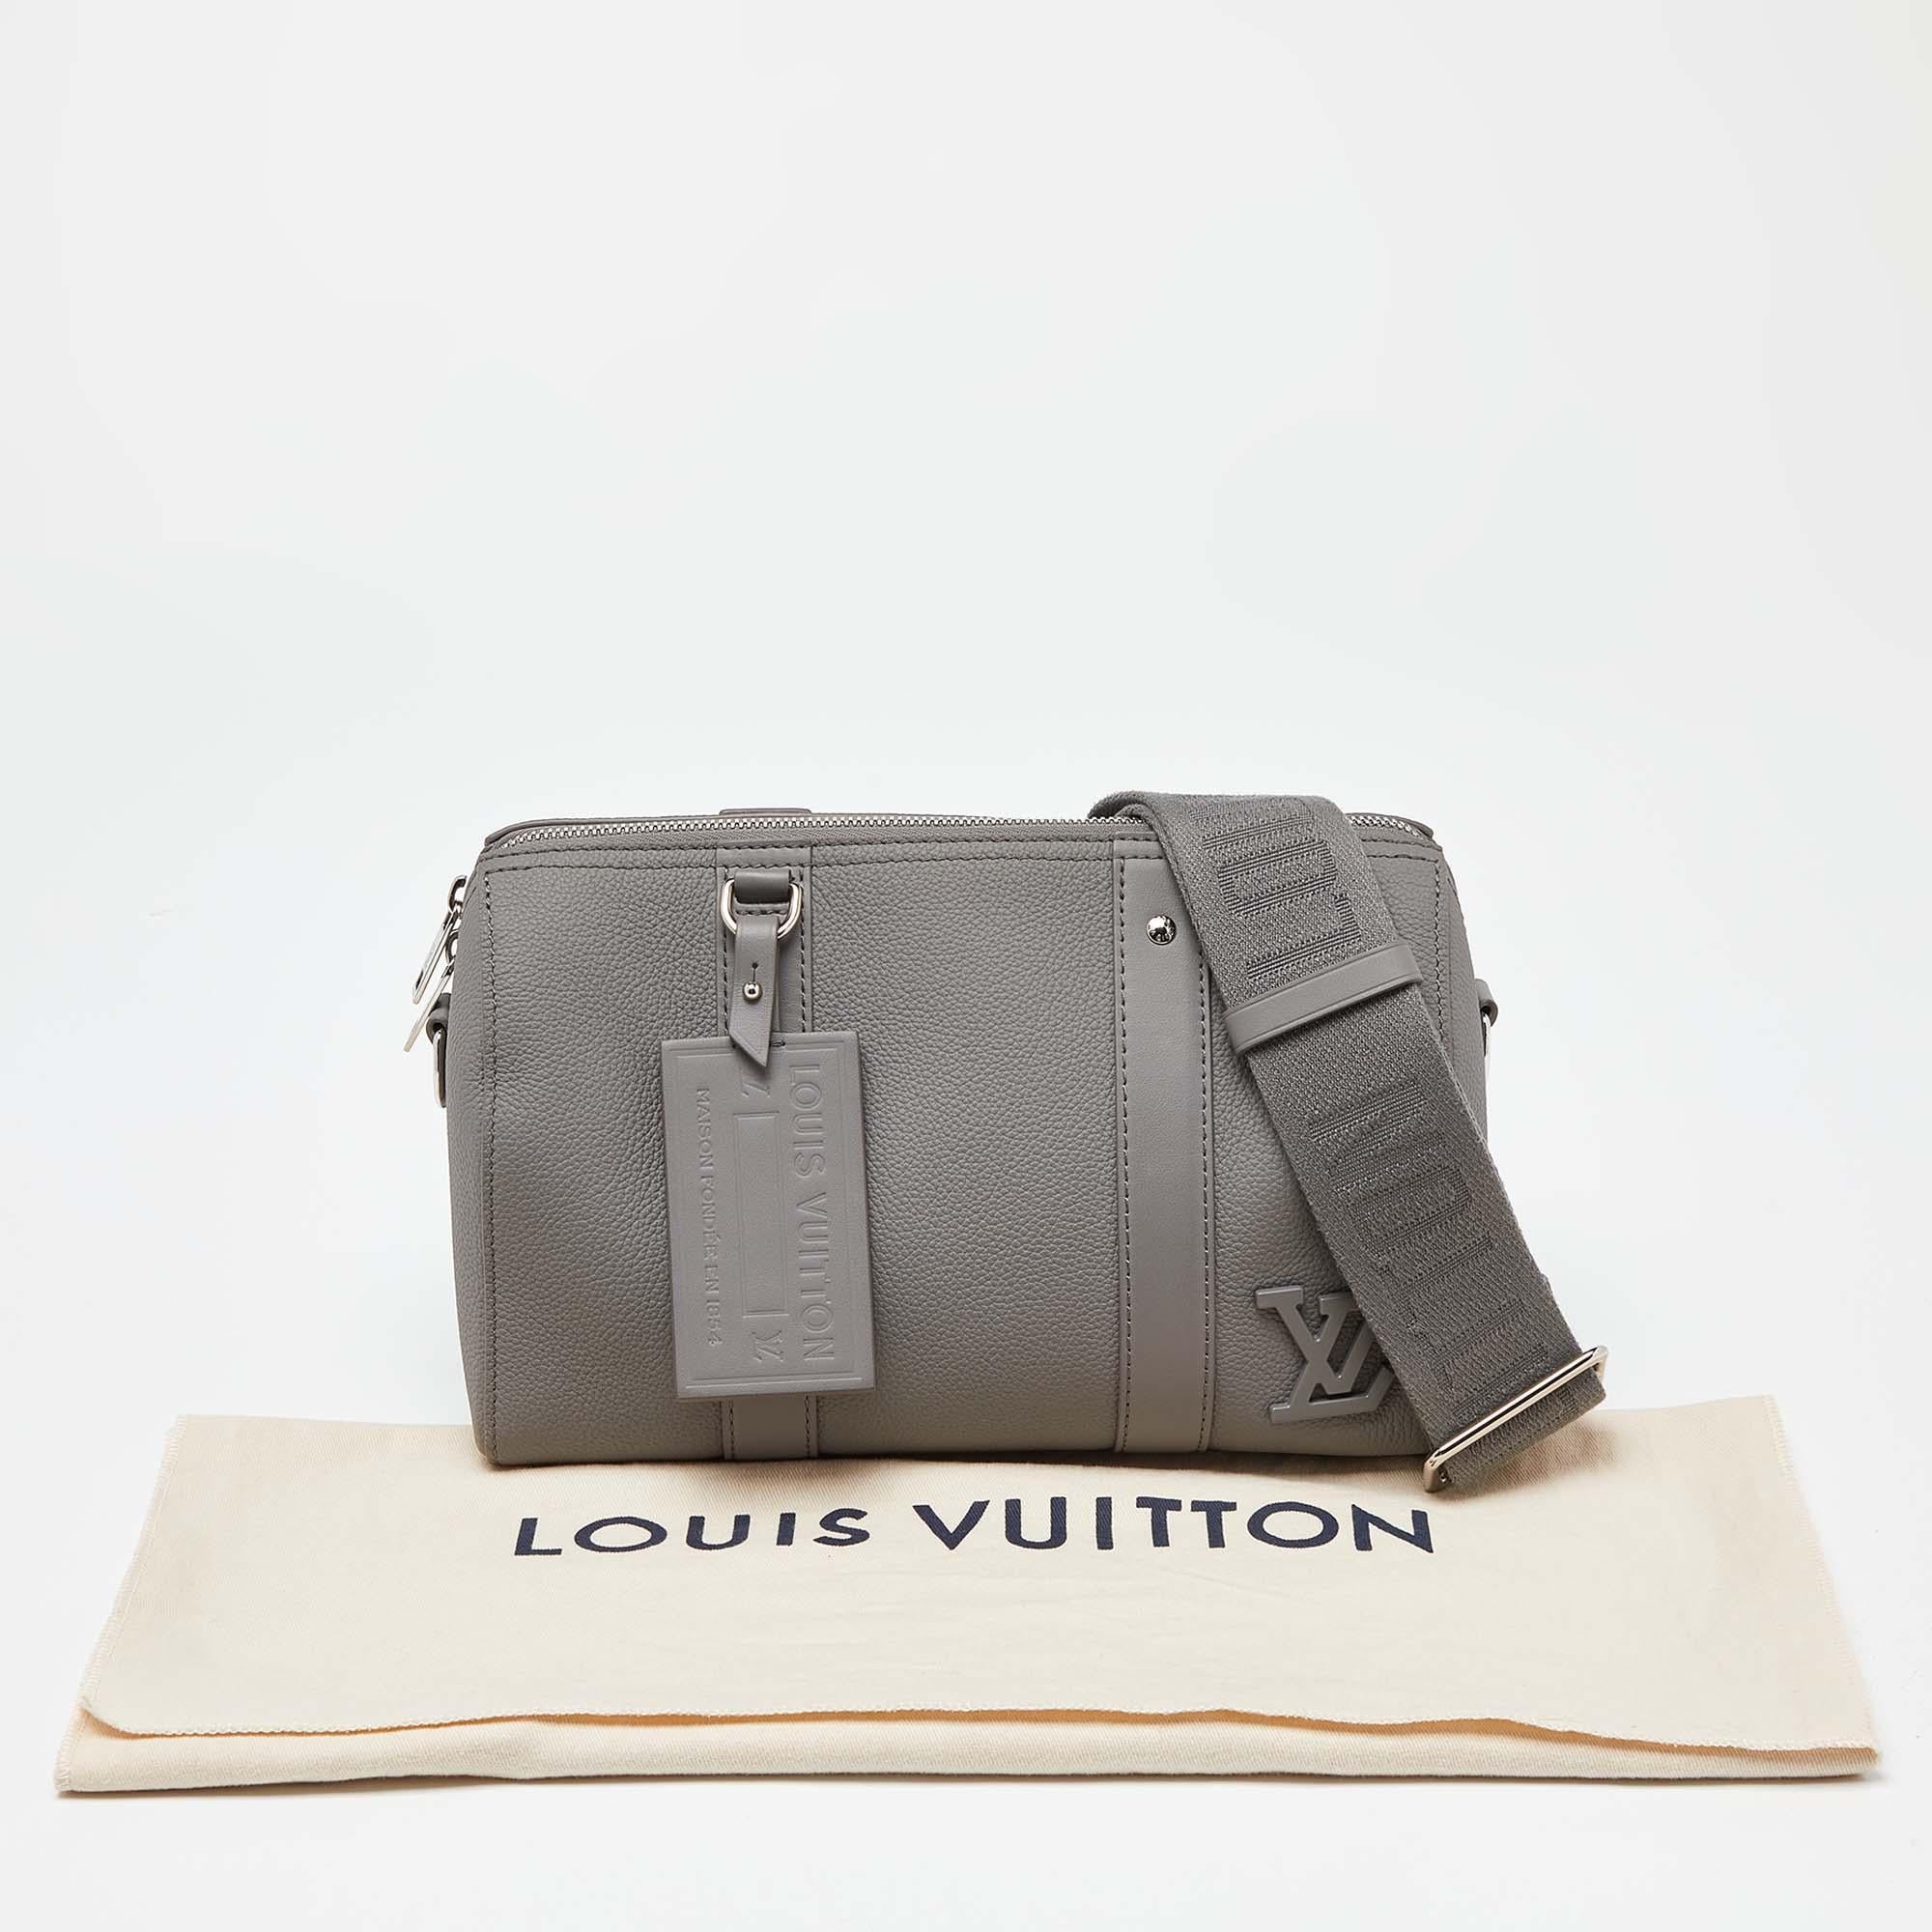 Louis Vuitton Grey Leather City Keepall Bag 8